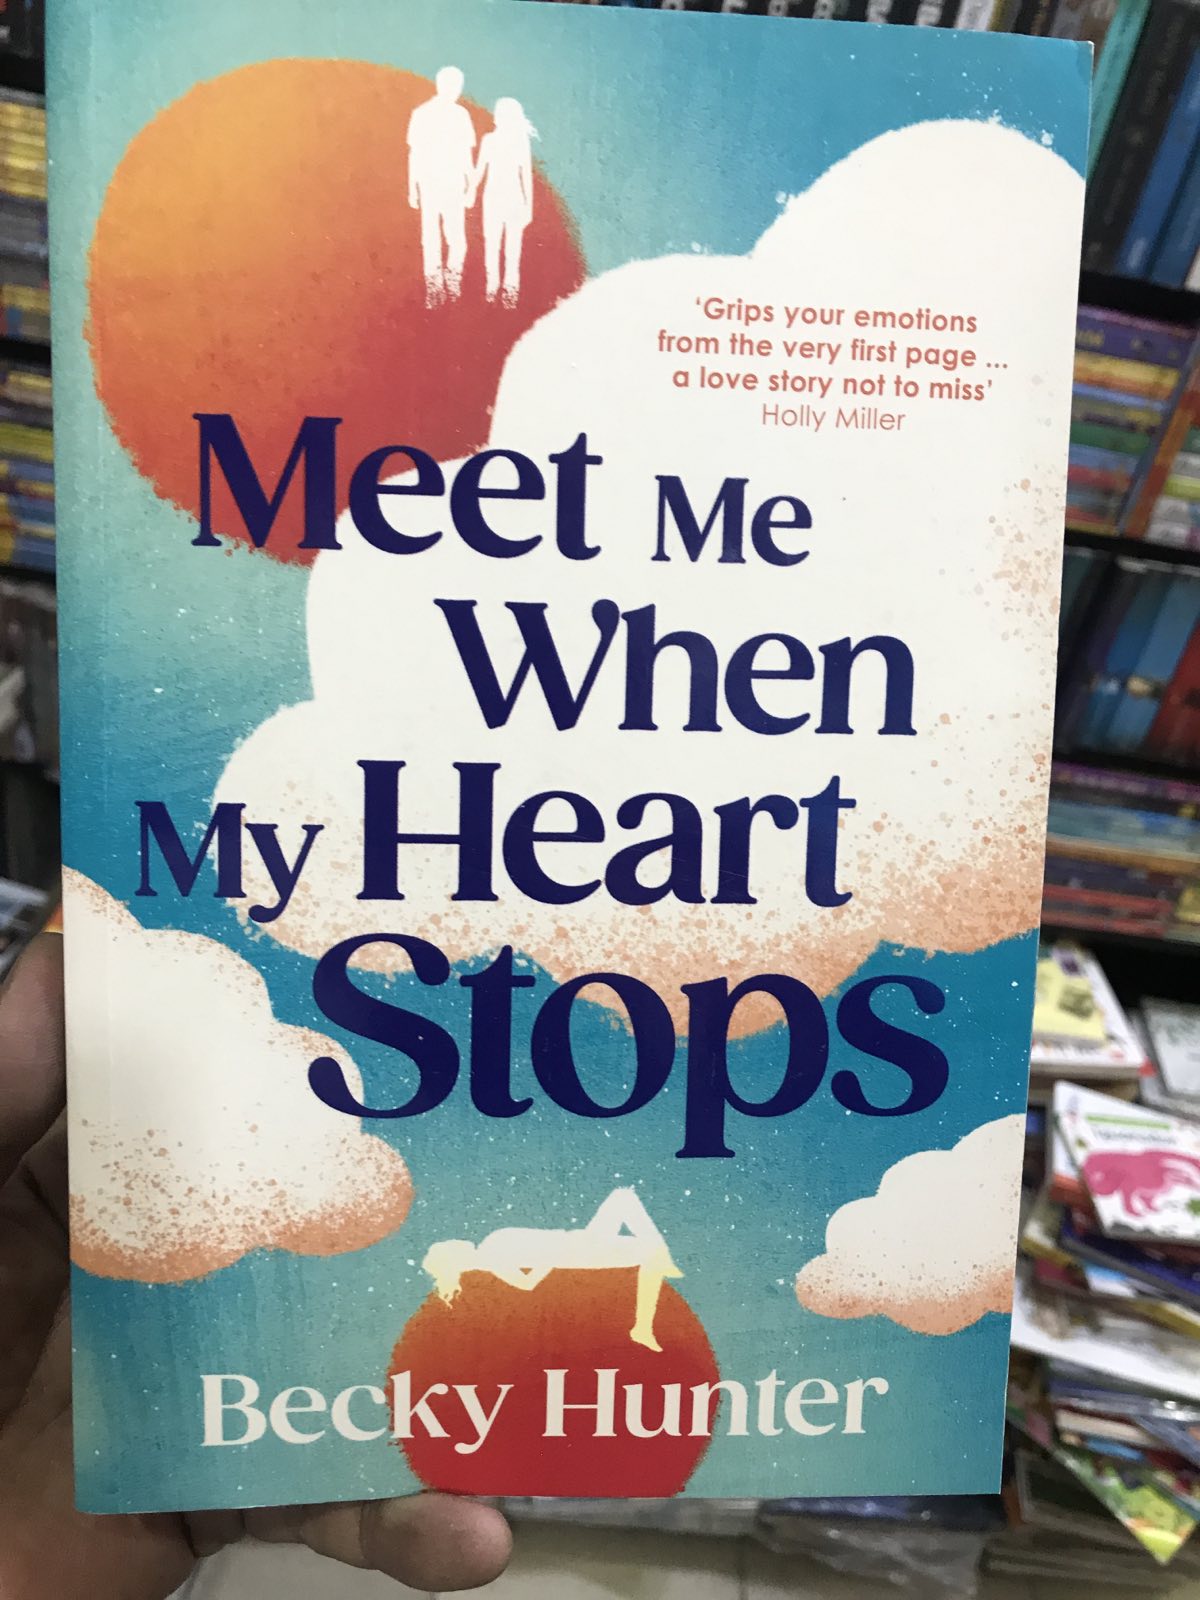 Meet Me When My Heart Stops by Becky Hunter at BIBLIONEPAL Bookstore